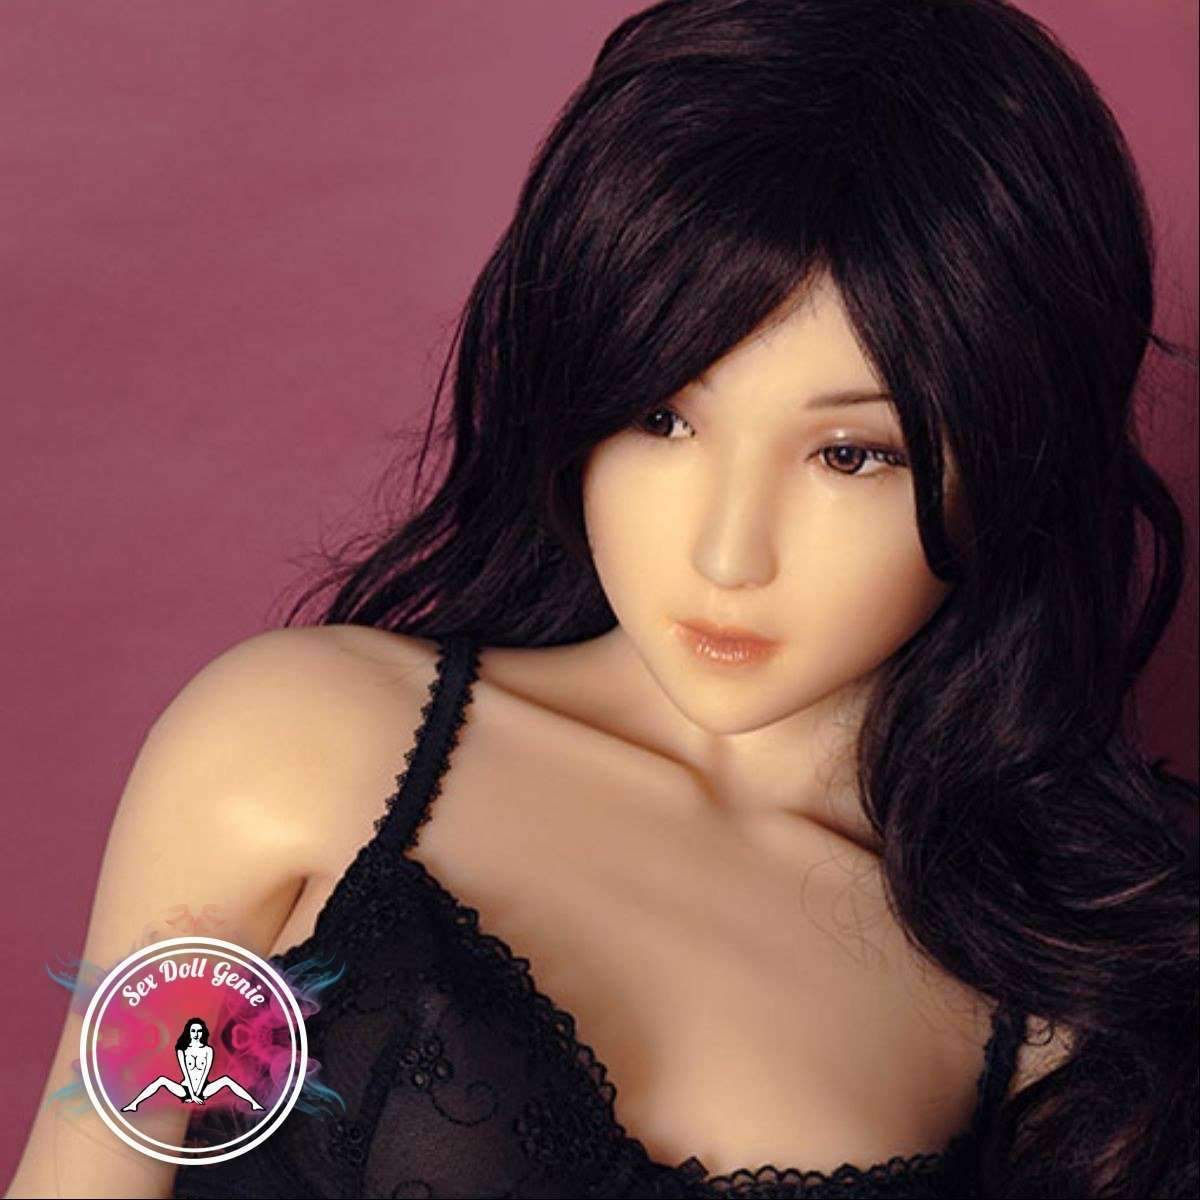 DS Doll - 163 - Emily Head - Type 1 D Cup Silicone Doll-10